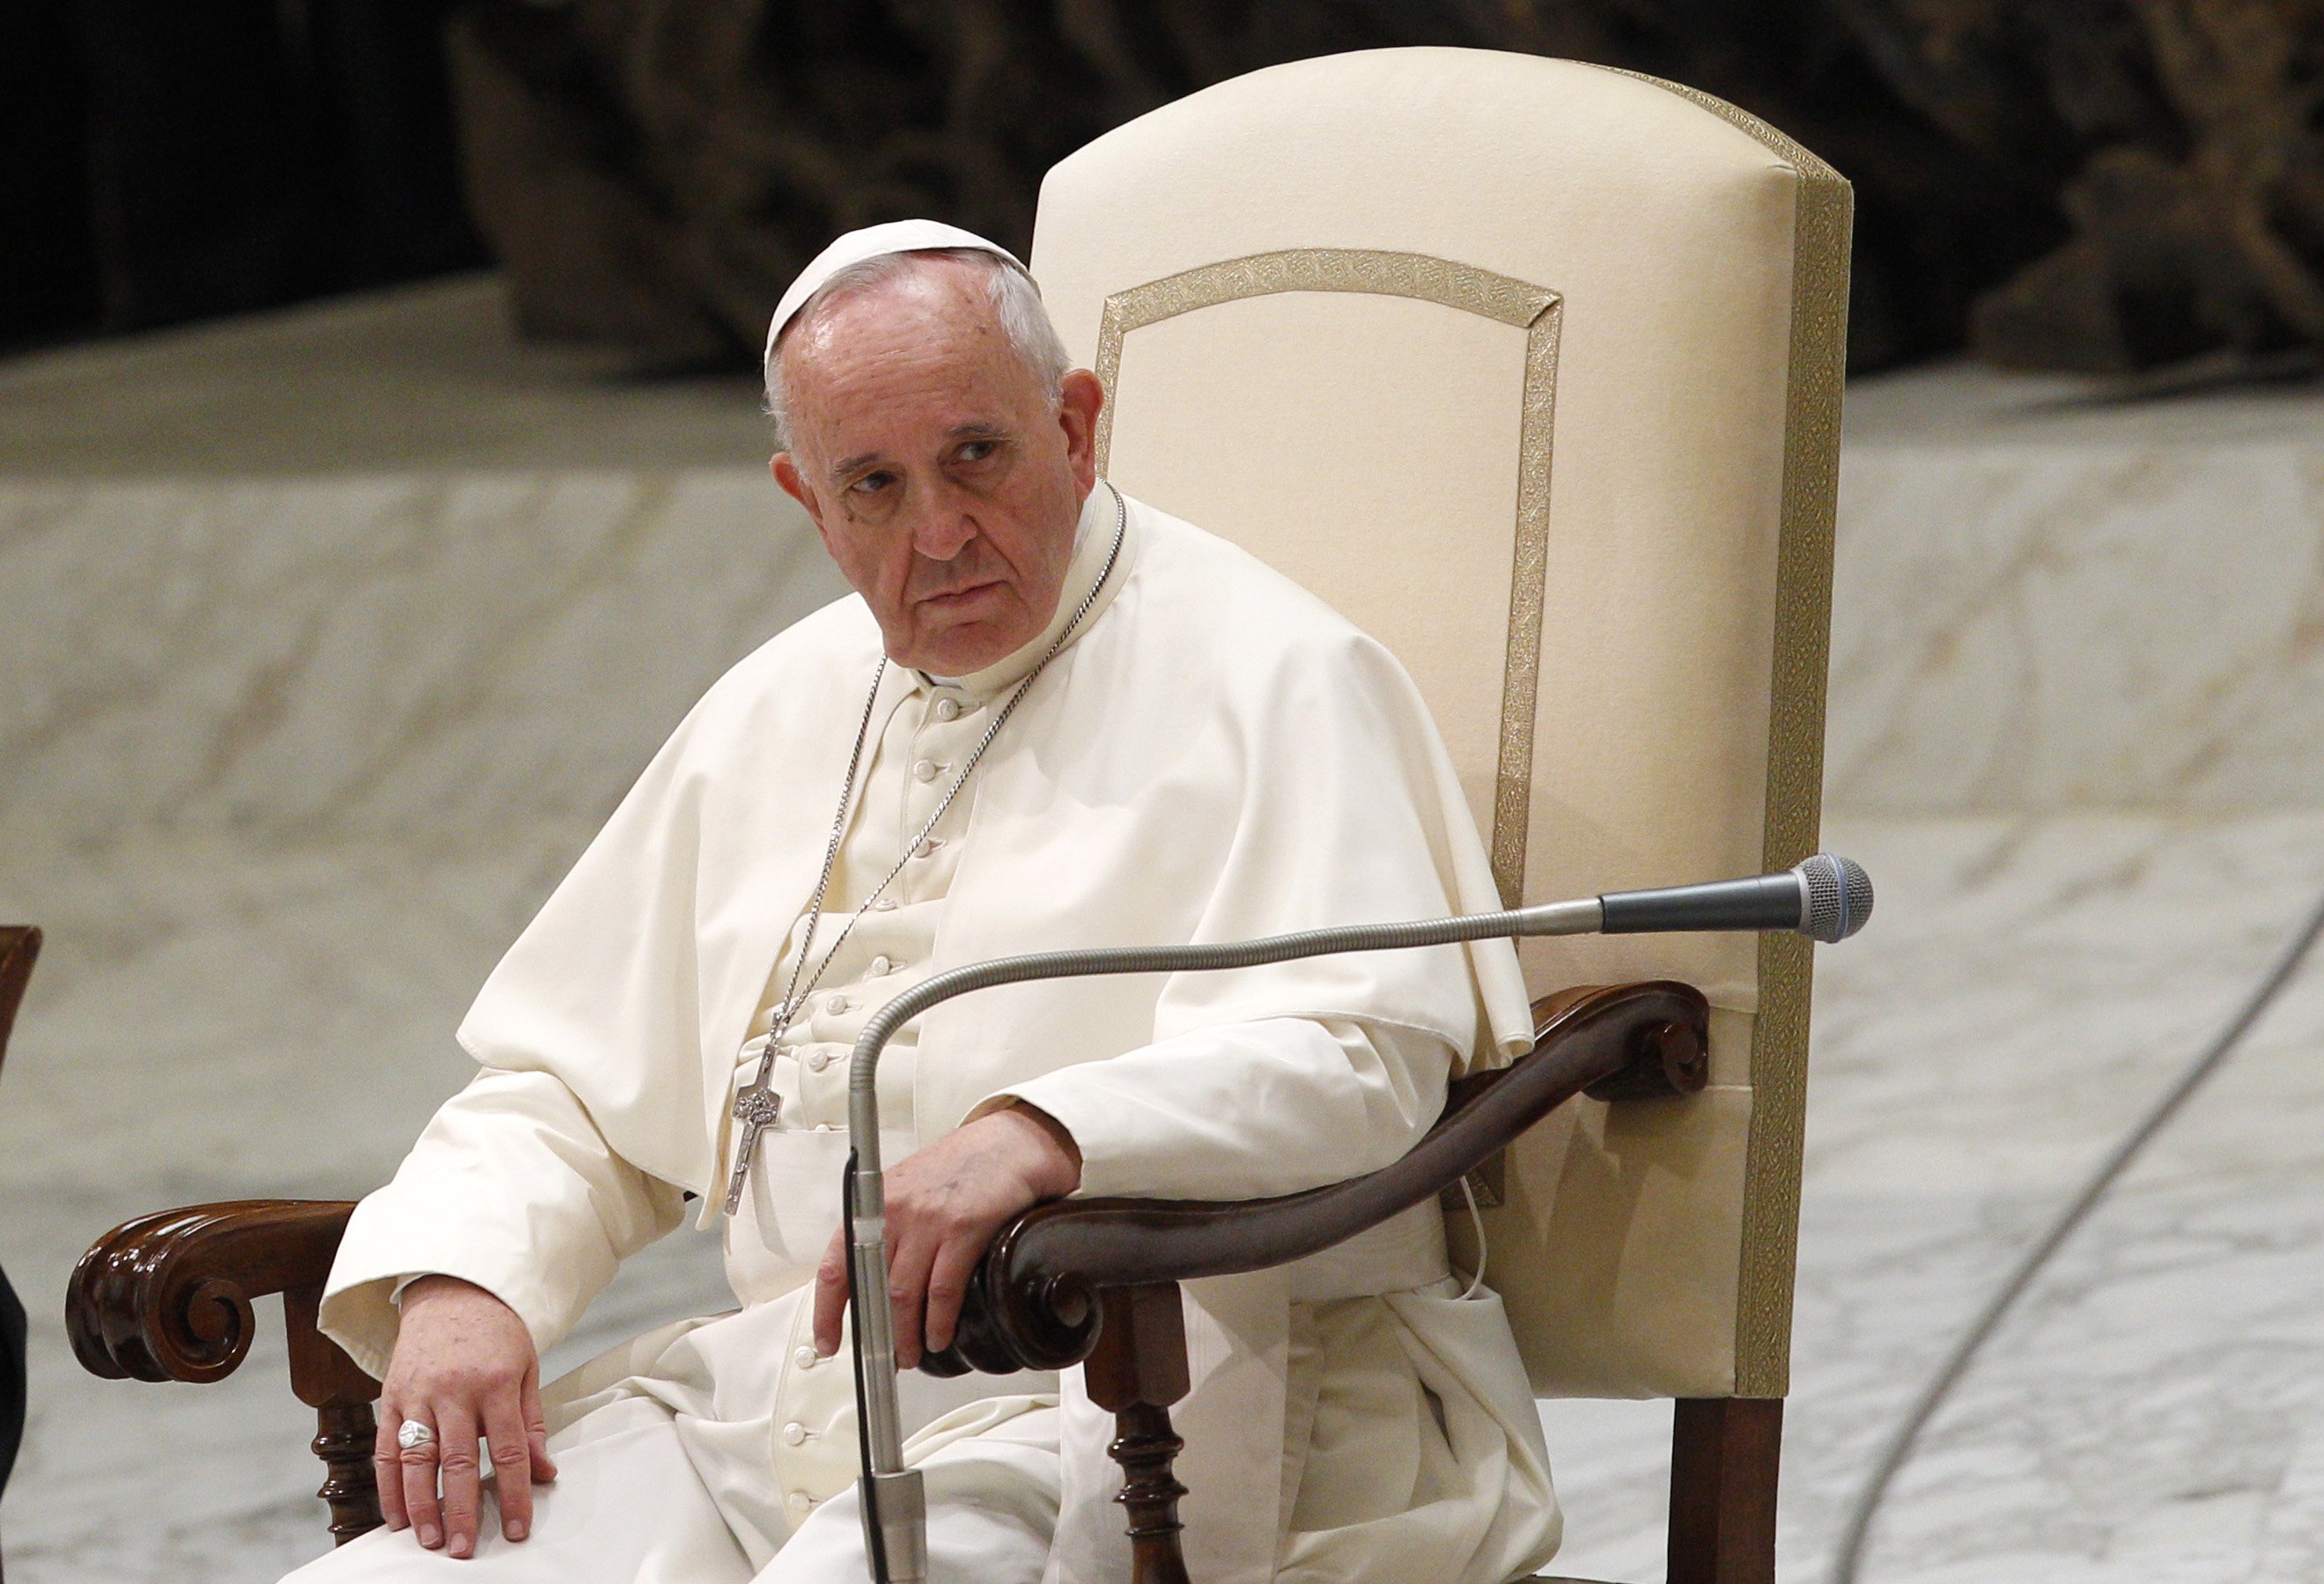 Pope Francis attends his weekly general audience in the Paul VI hall, at the Vatican on Aug. 20, 2014. (Riccardo De Luca—AP)